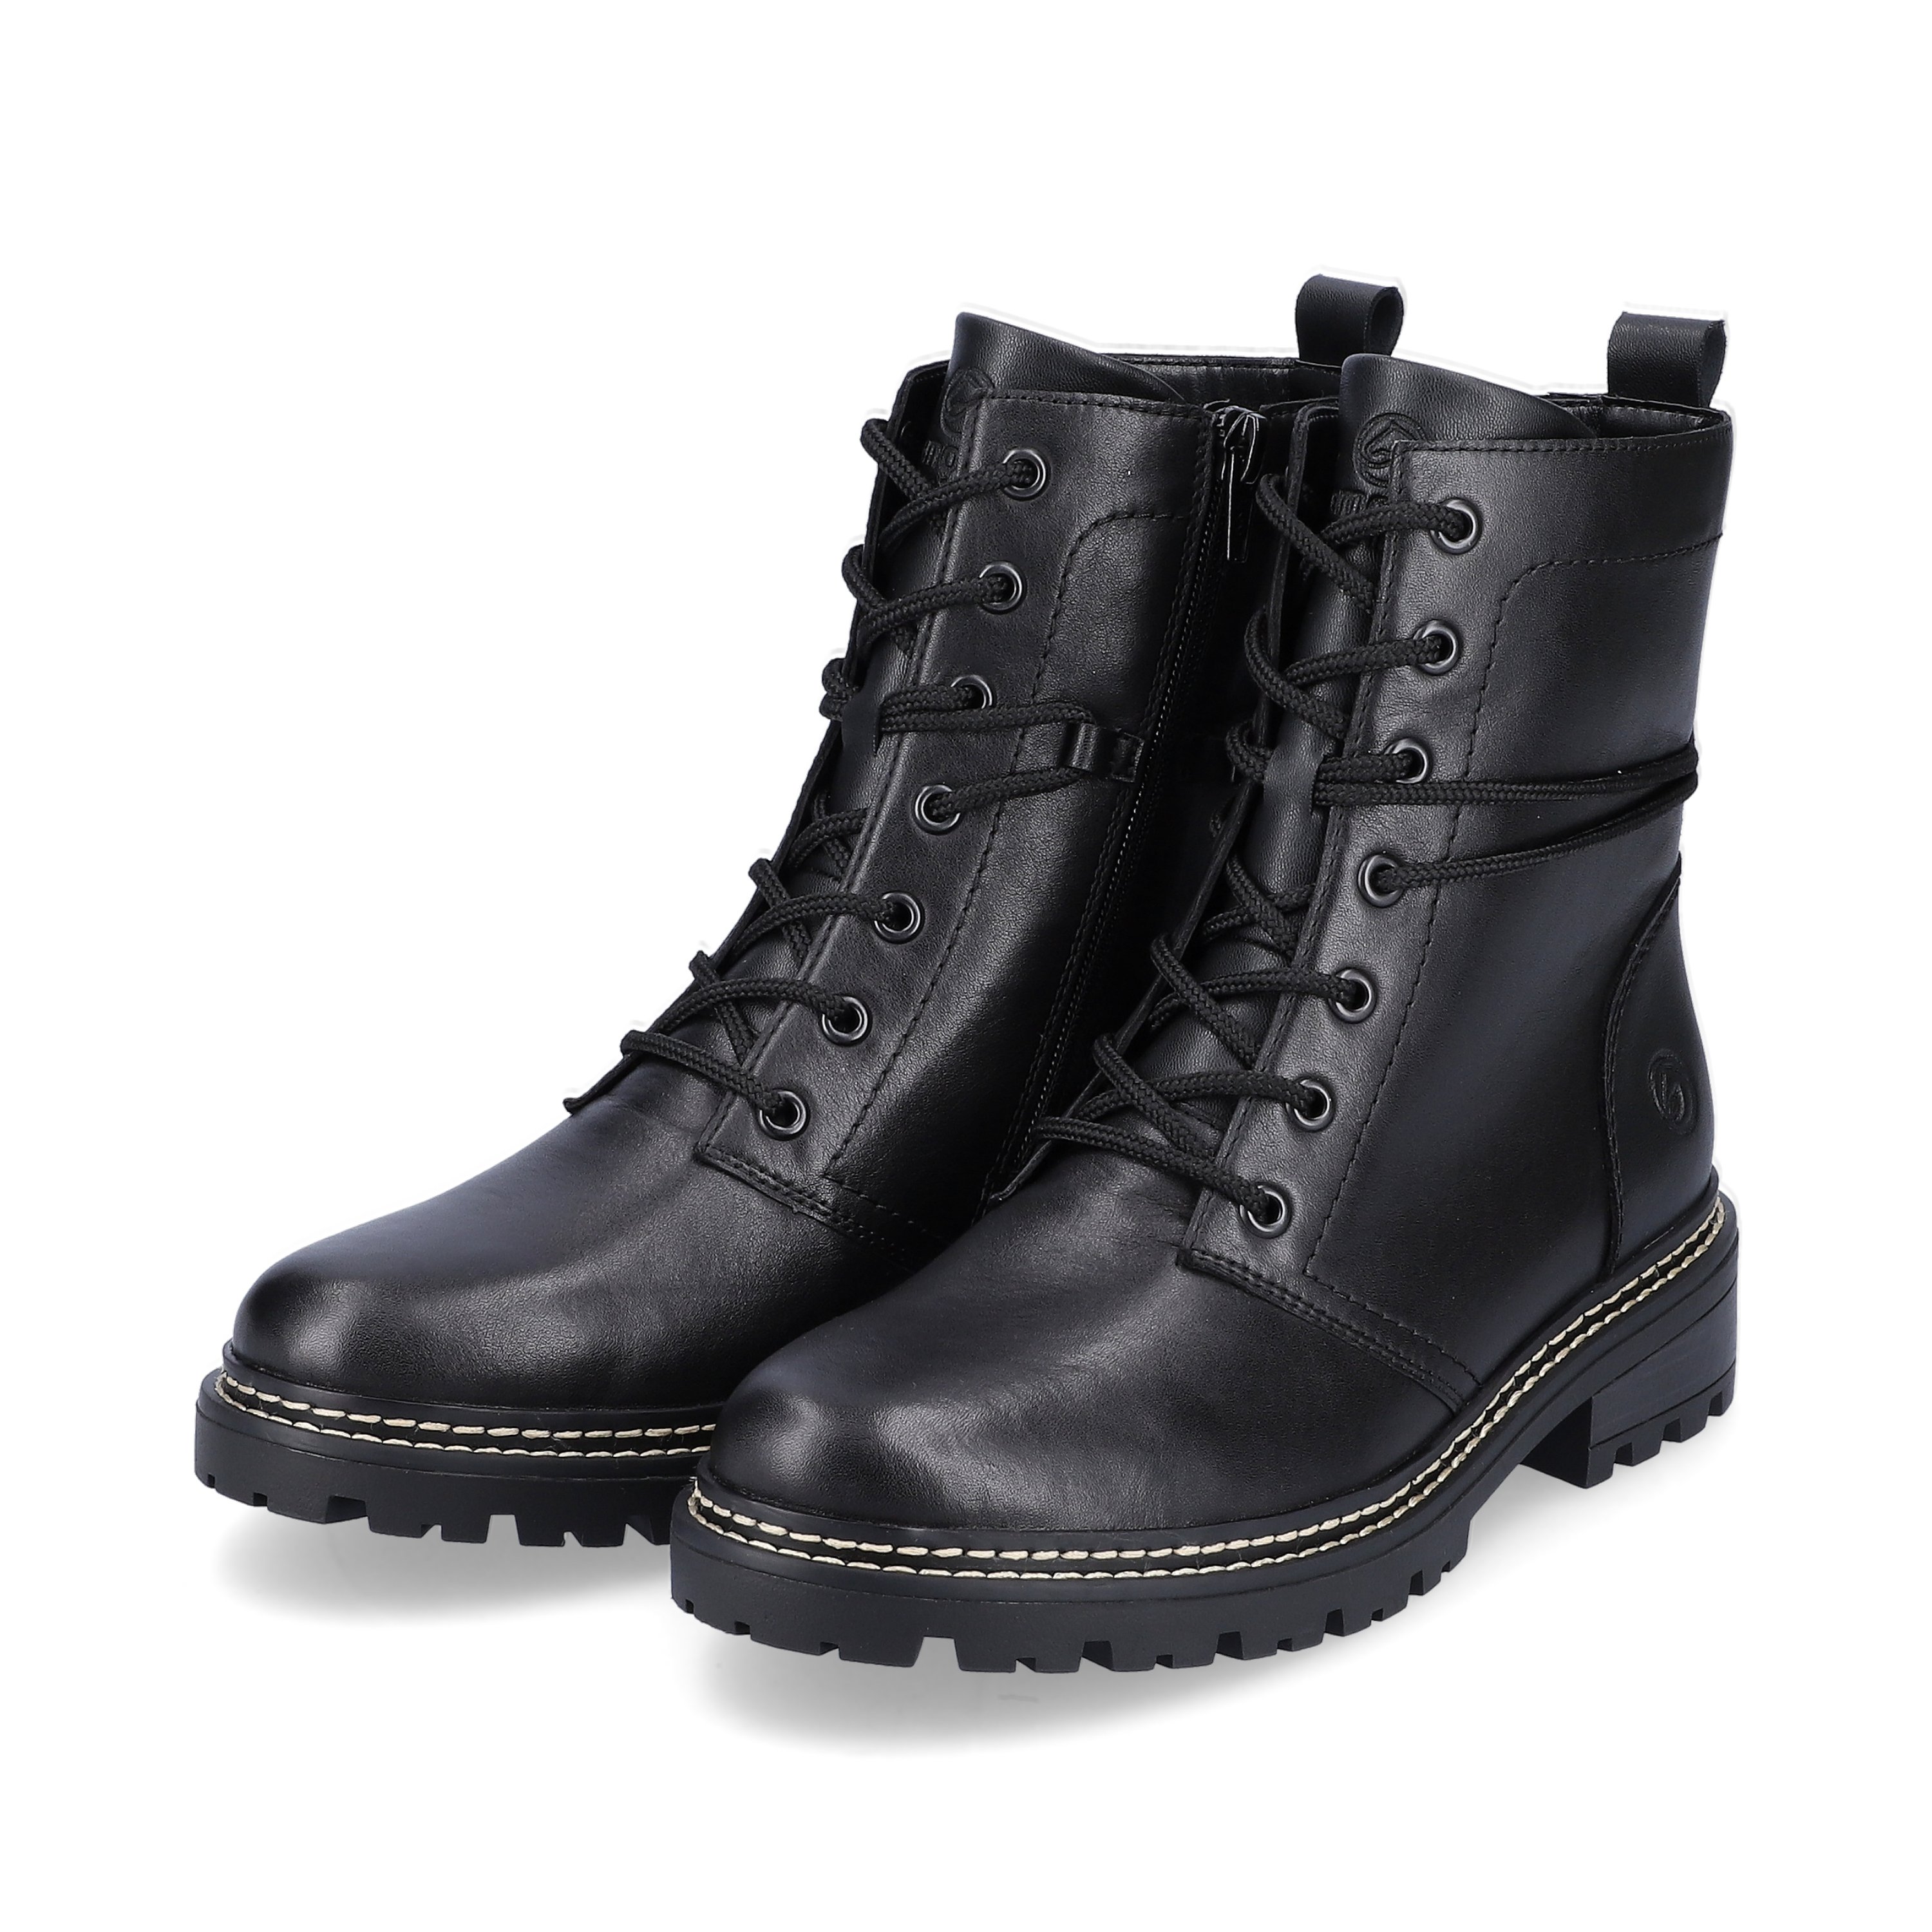 Night black remonte women´s biker boots D0B75-01 with cushioning profile sole. Shoe laterally